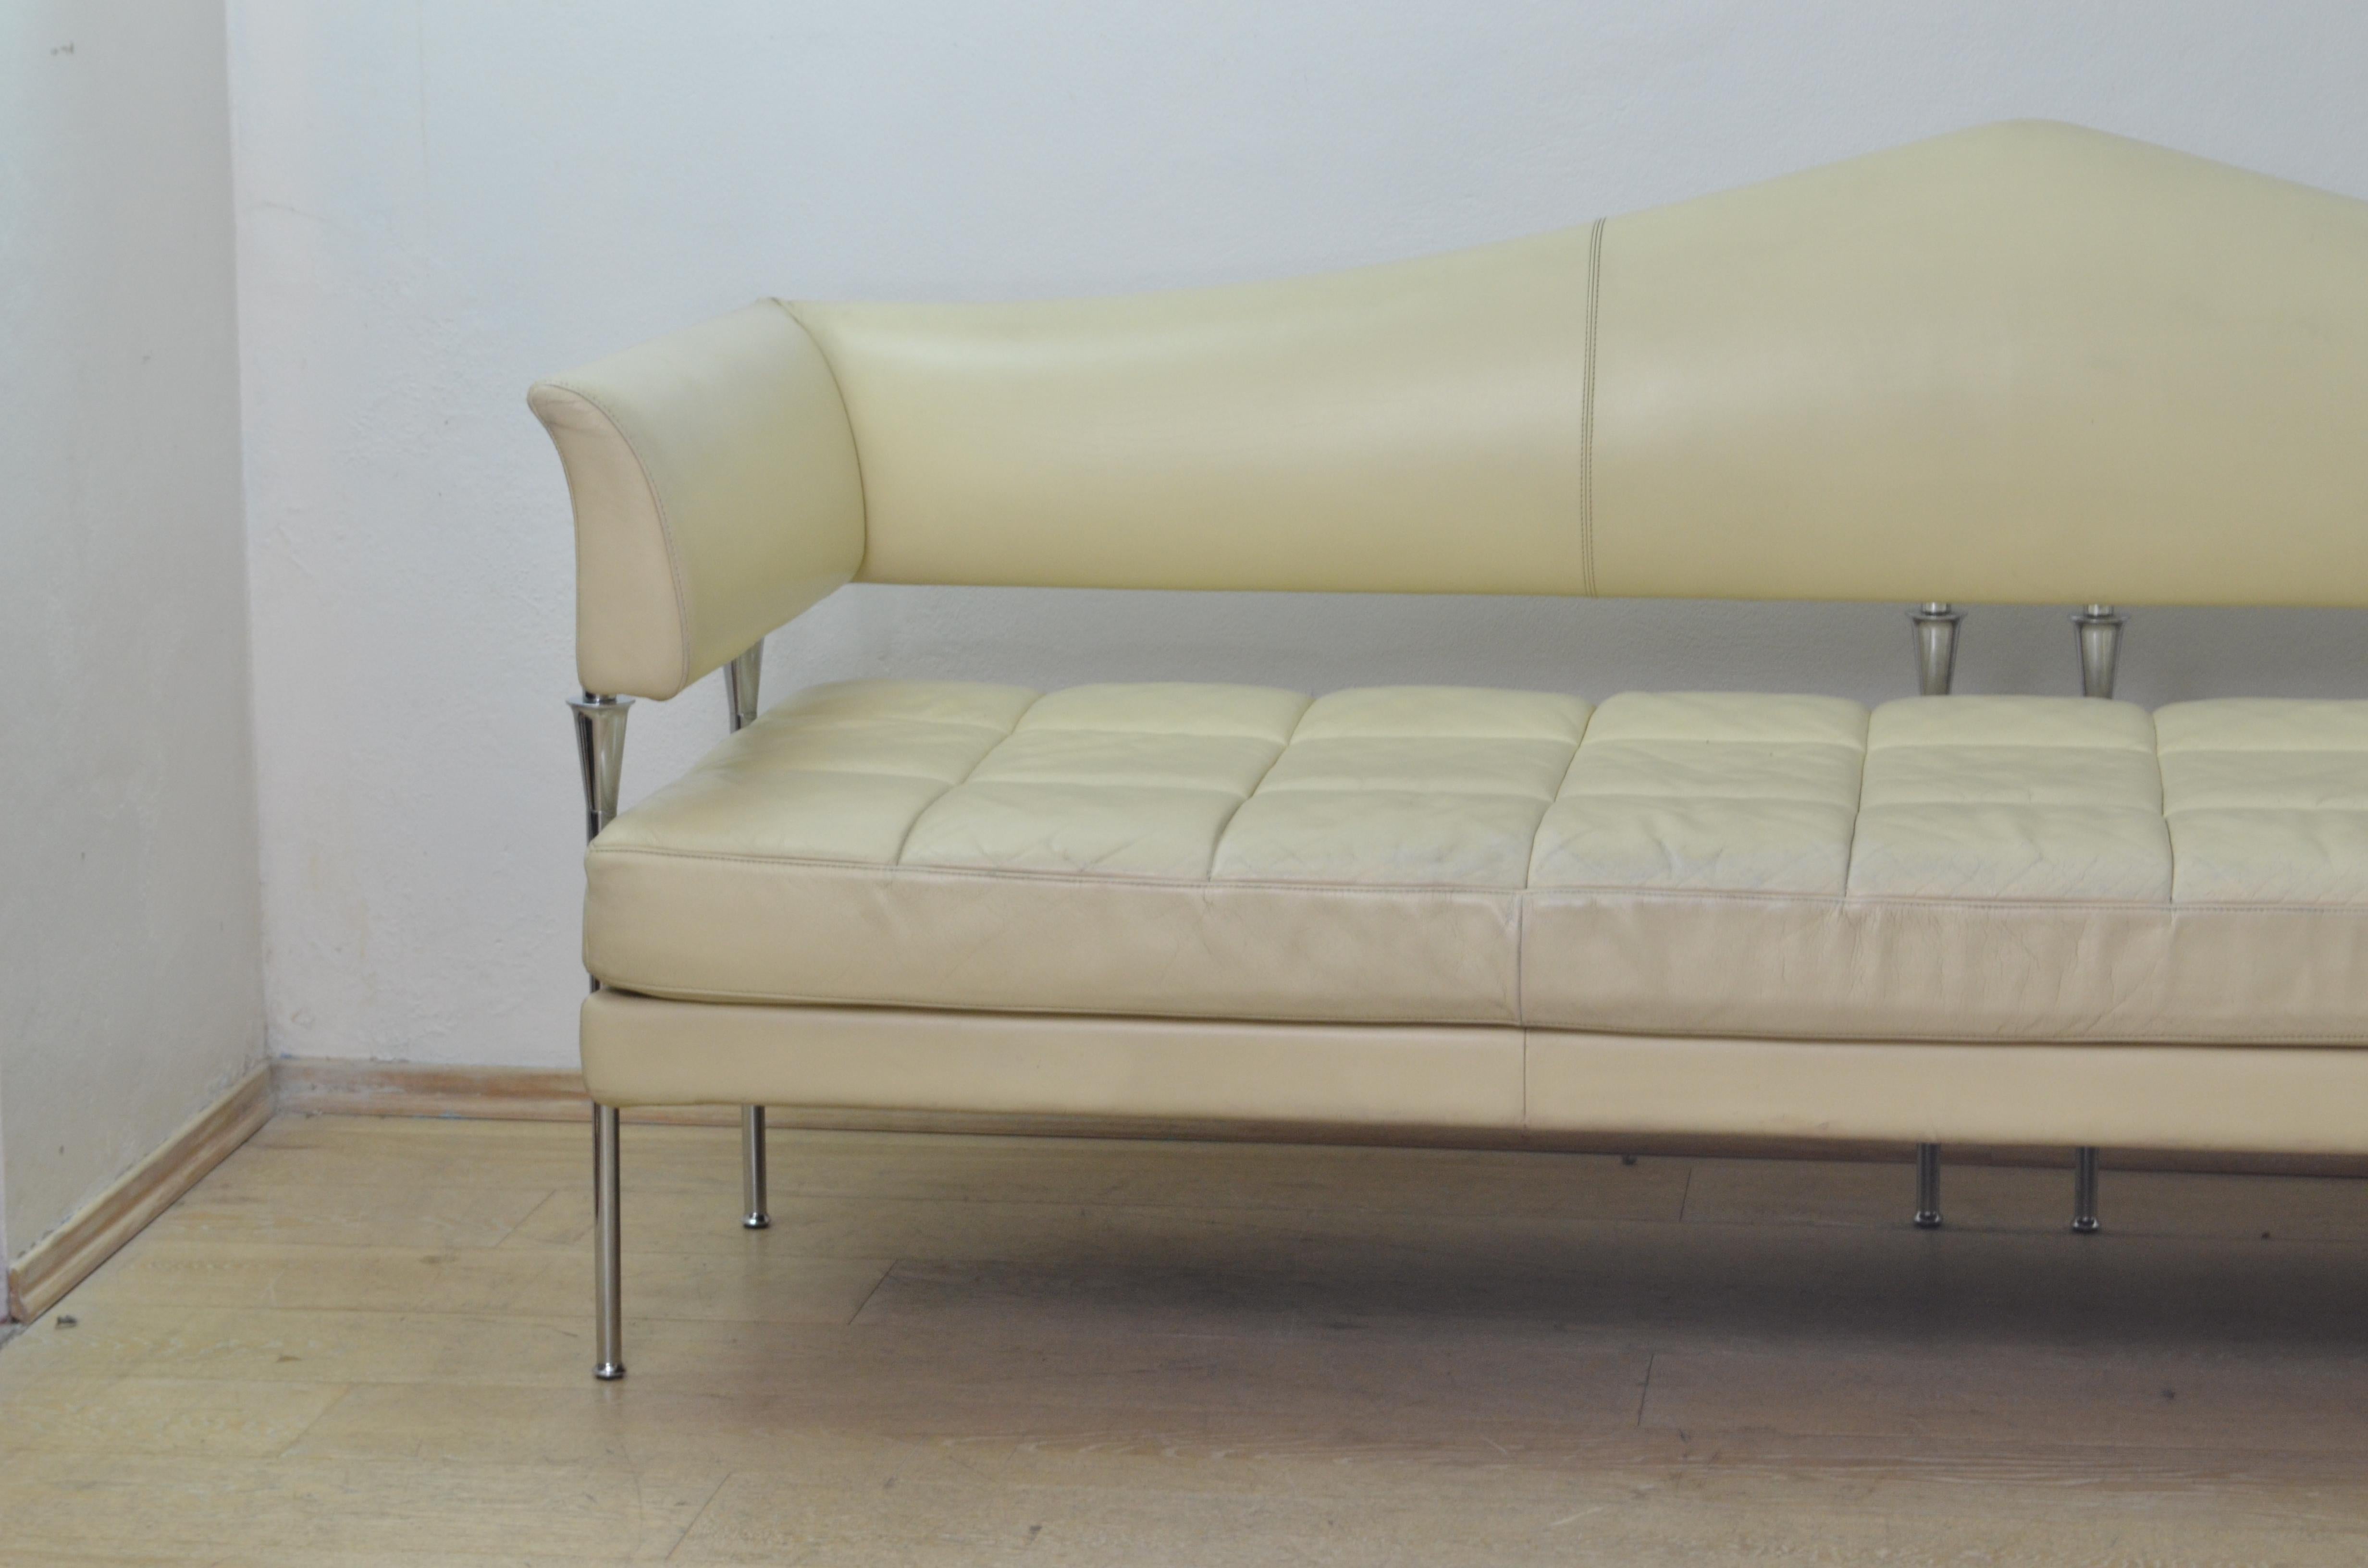 Original Poltrona Frau sofa or bench. The model is named Hydra and is produced by Poltrona Frau since 1992. It is upholstered in beige cream color leather. It is composed by a single seat equipped with armrest and back rest. The base structure is